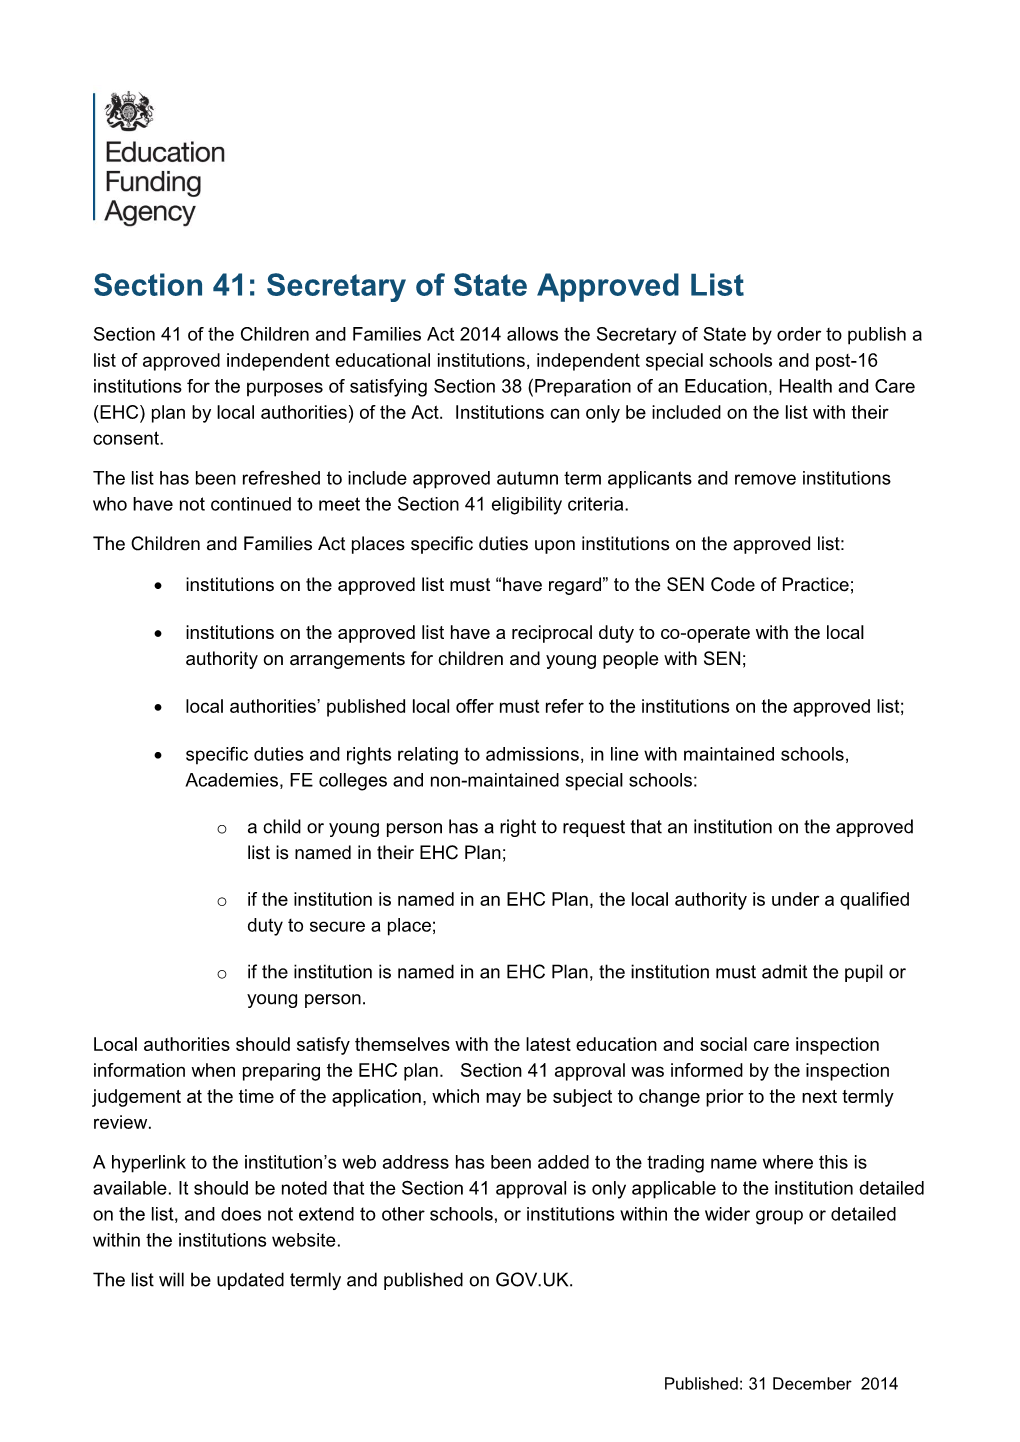 Section 41: Secretary of State Approved List